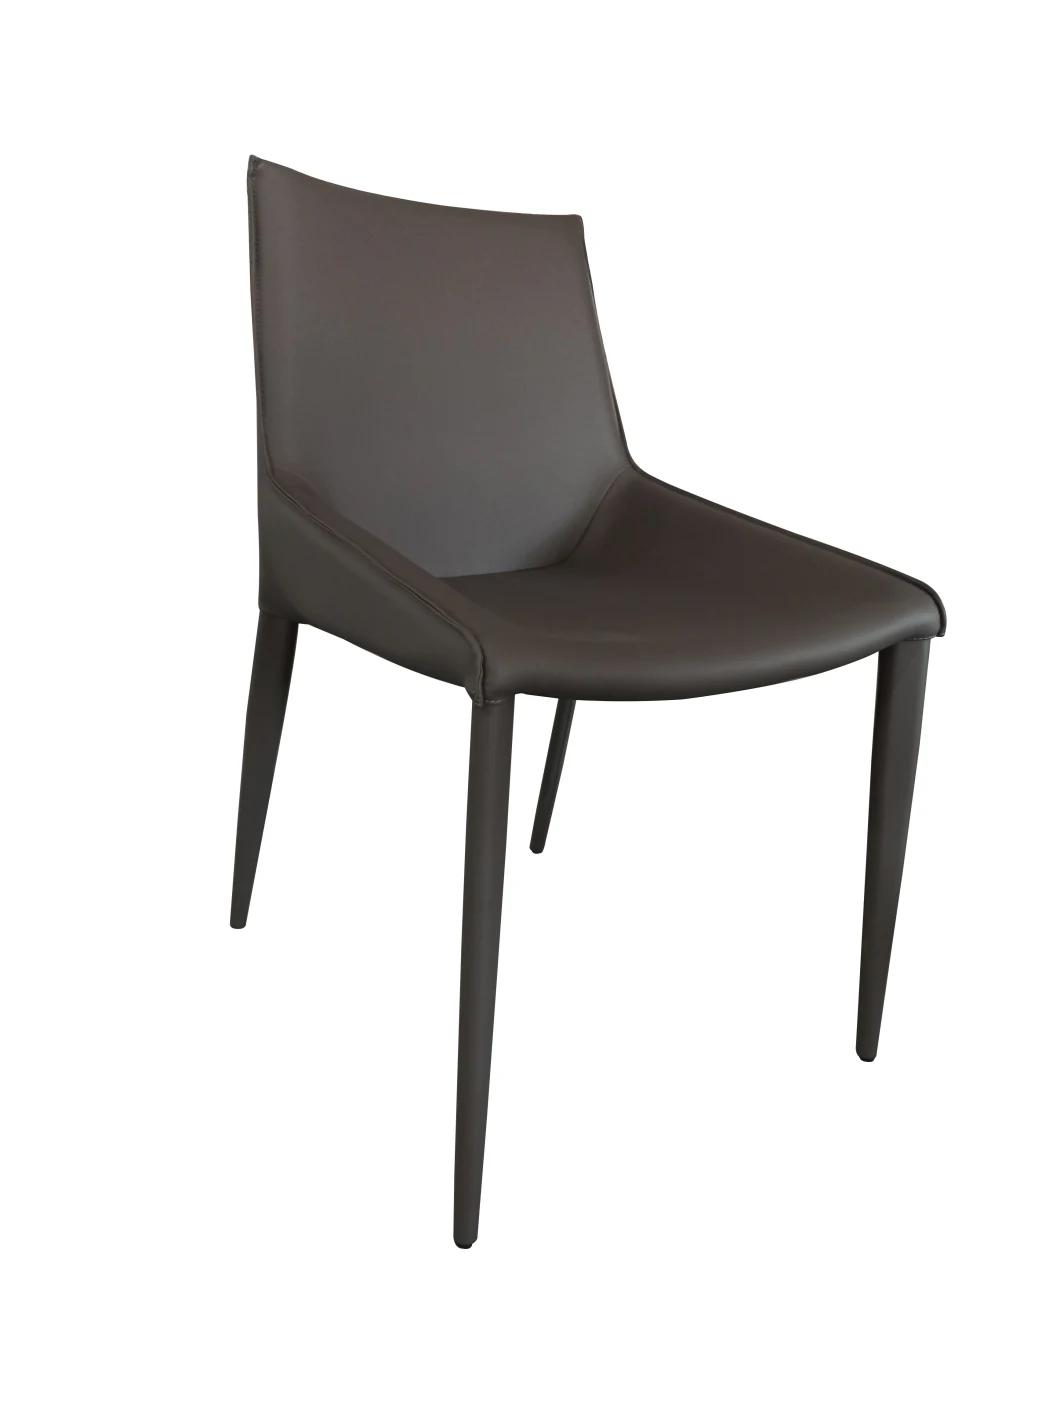 Wholesale Market Office Furniture Restaurant Home Modern Dinner Leather Living Room Dining Chairs